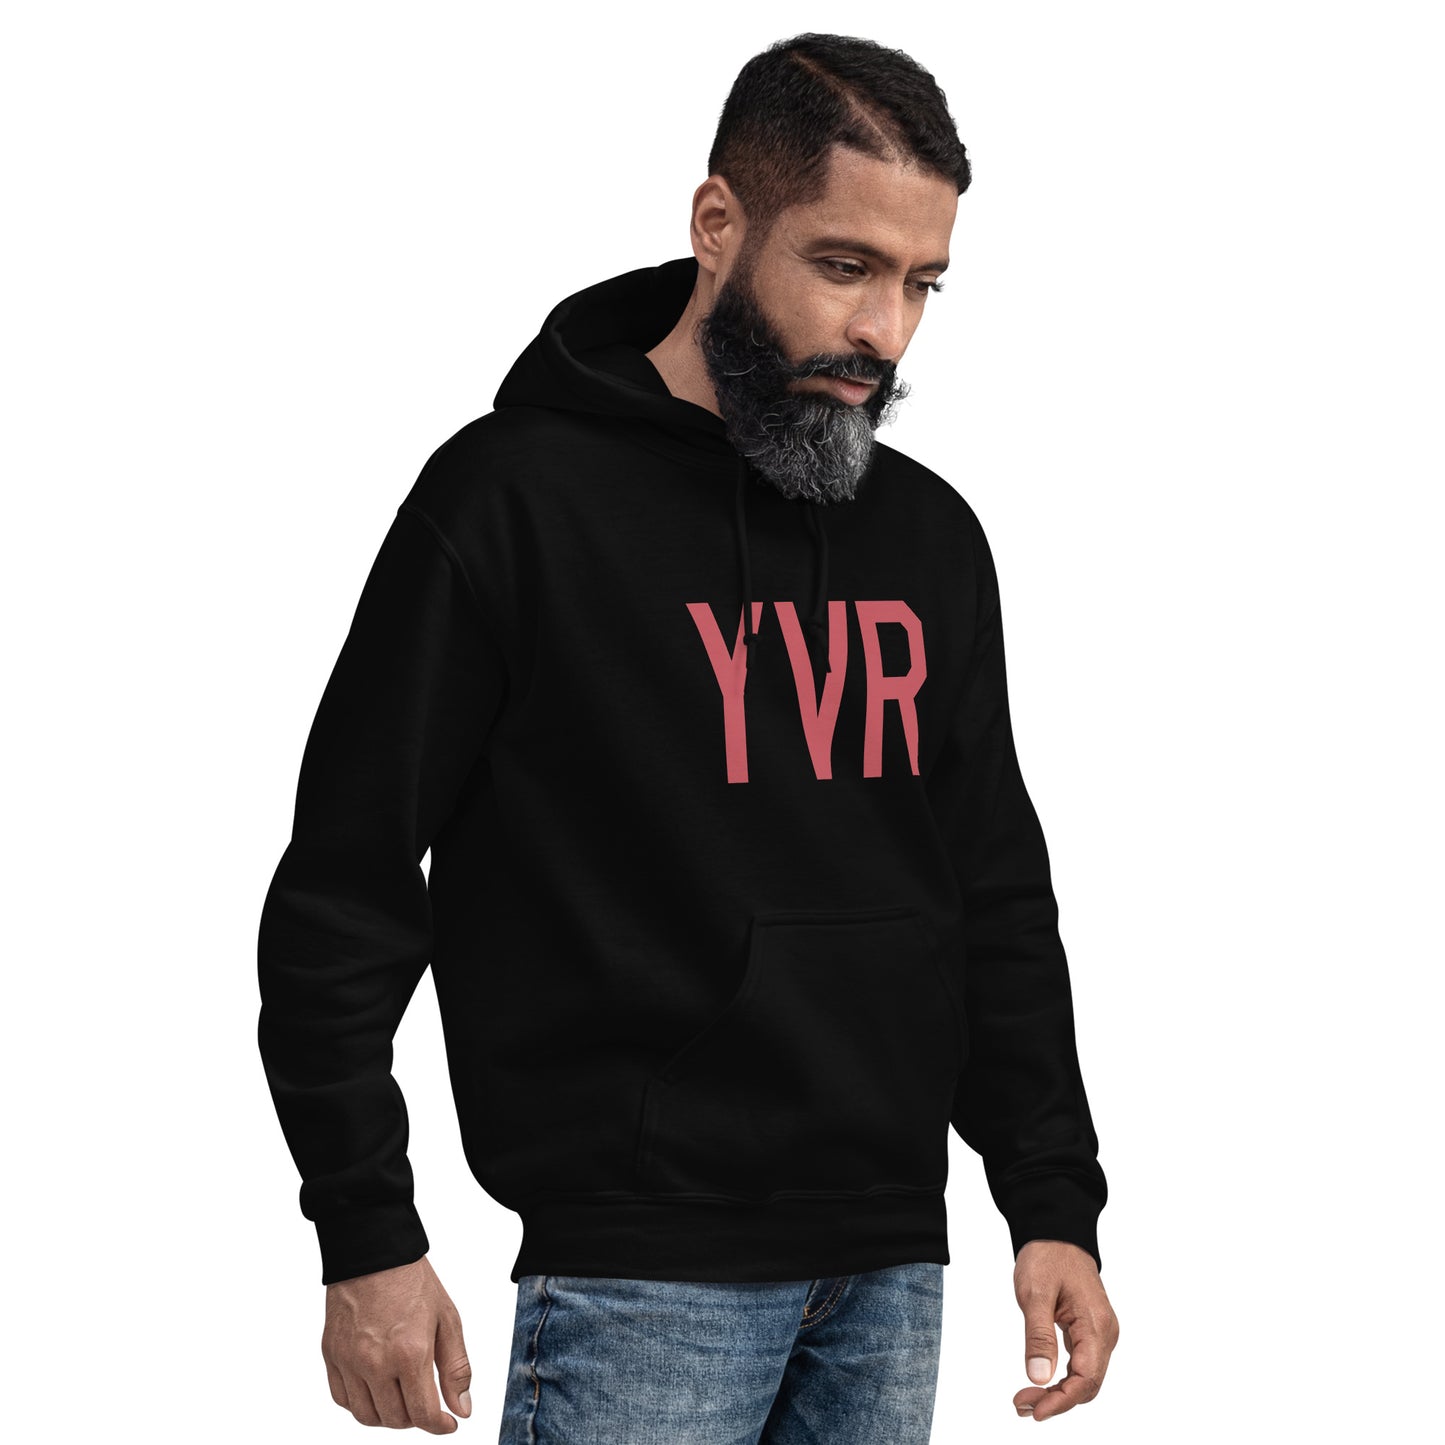 Aviation Enthusiast Hoodie - Deep Pink Graphic • YVR Vancouver • YHM Designs - Image 06